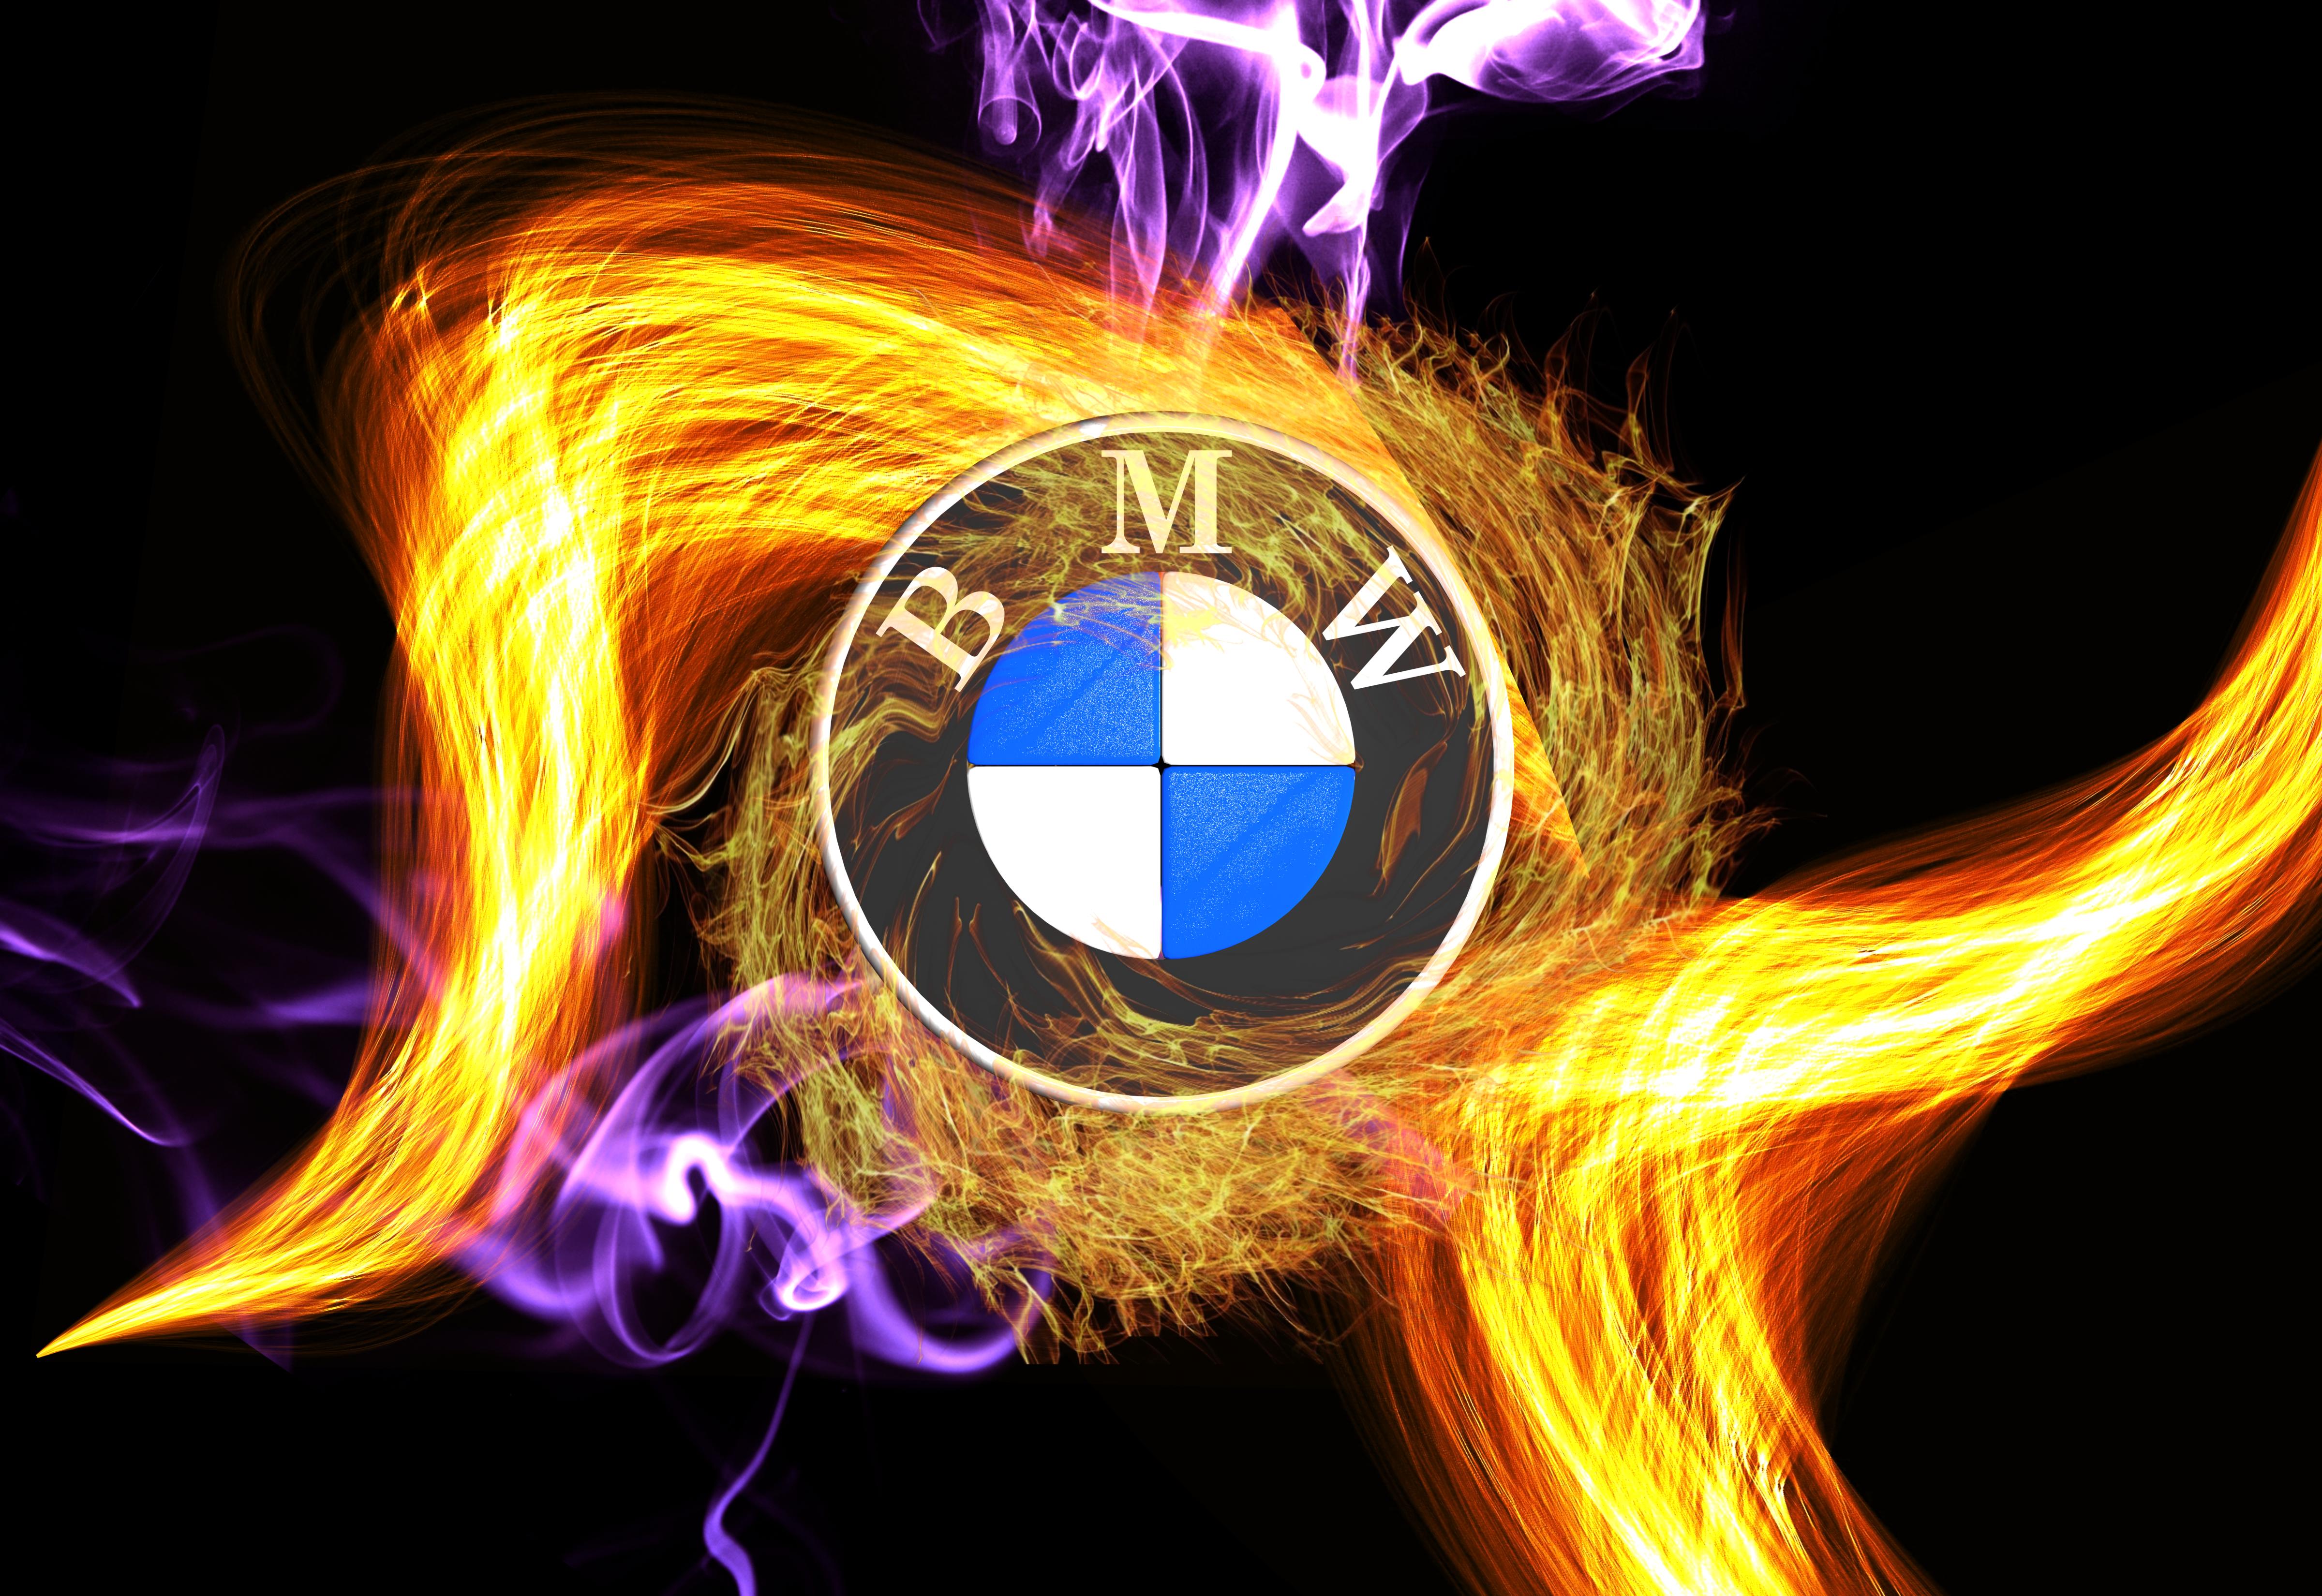 Wallpapers BMW auto car brand on the desktop